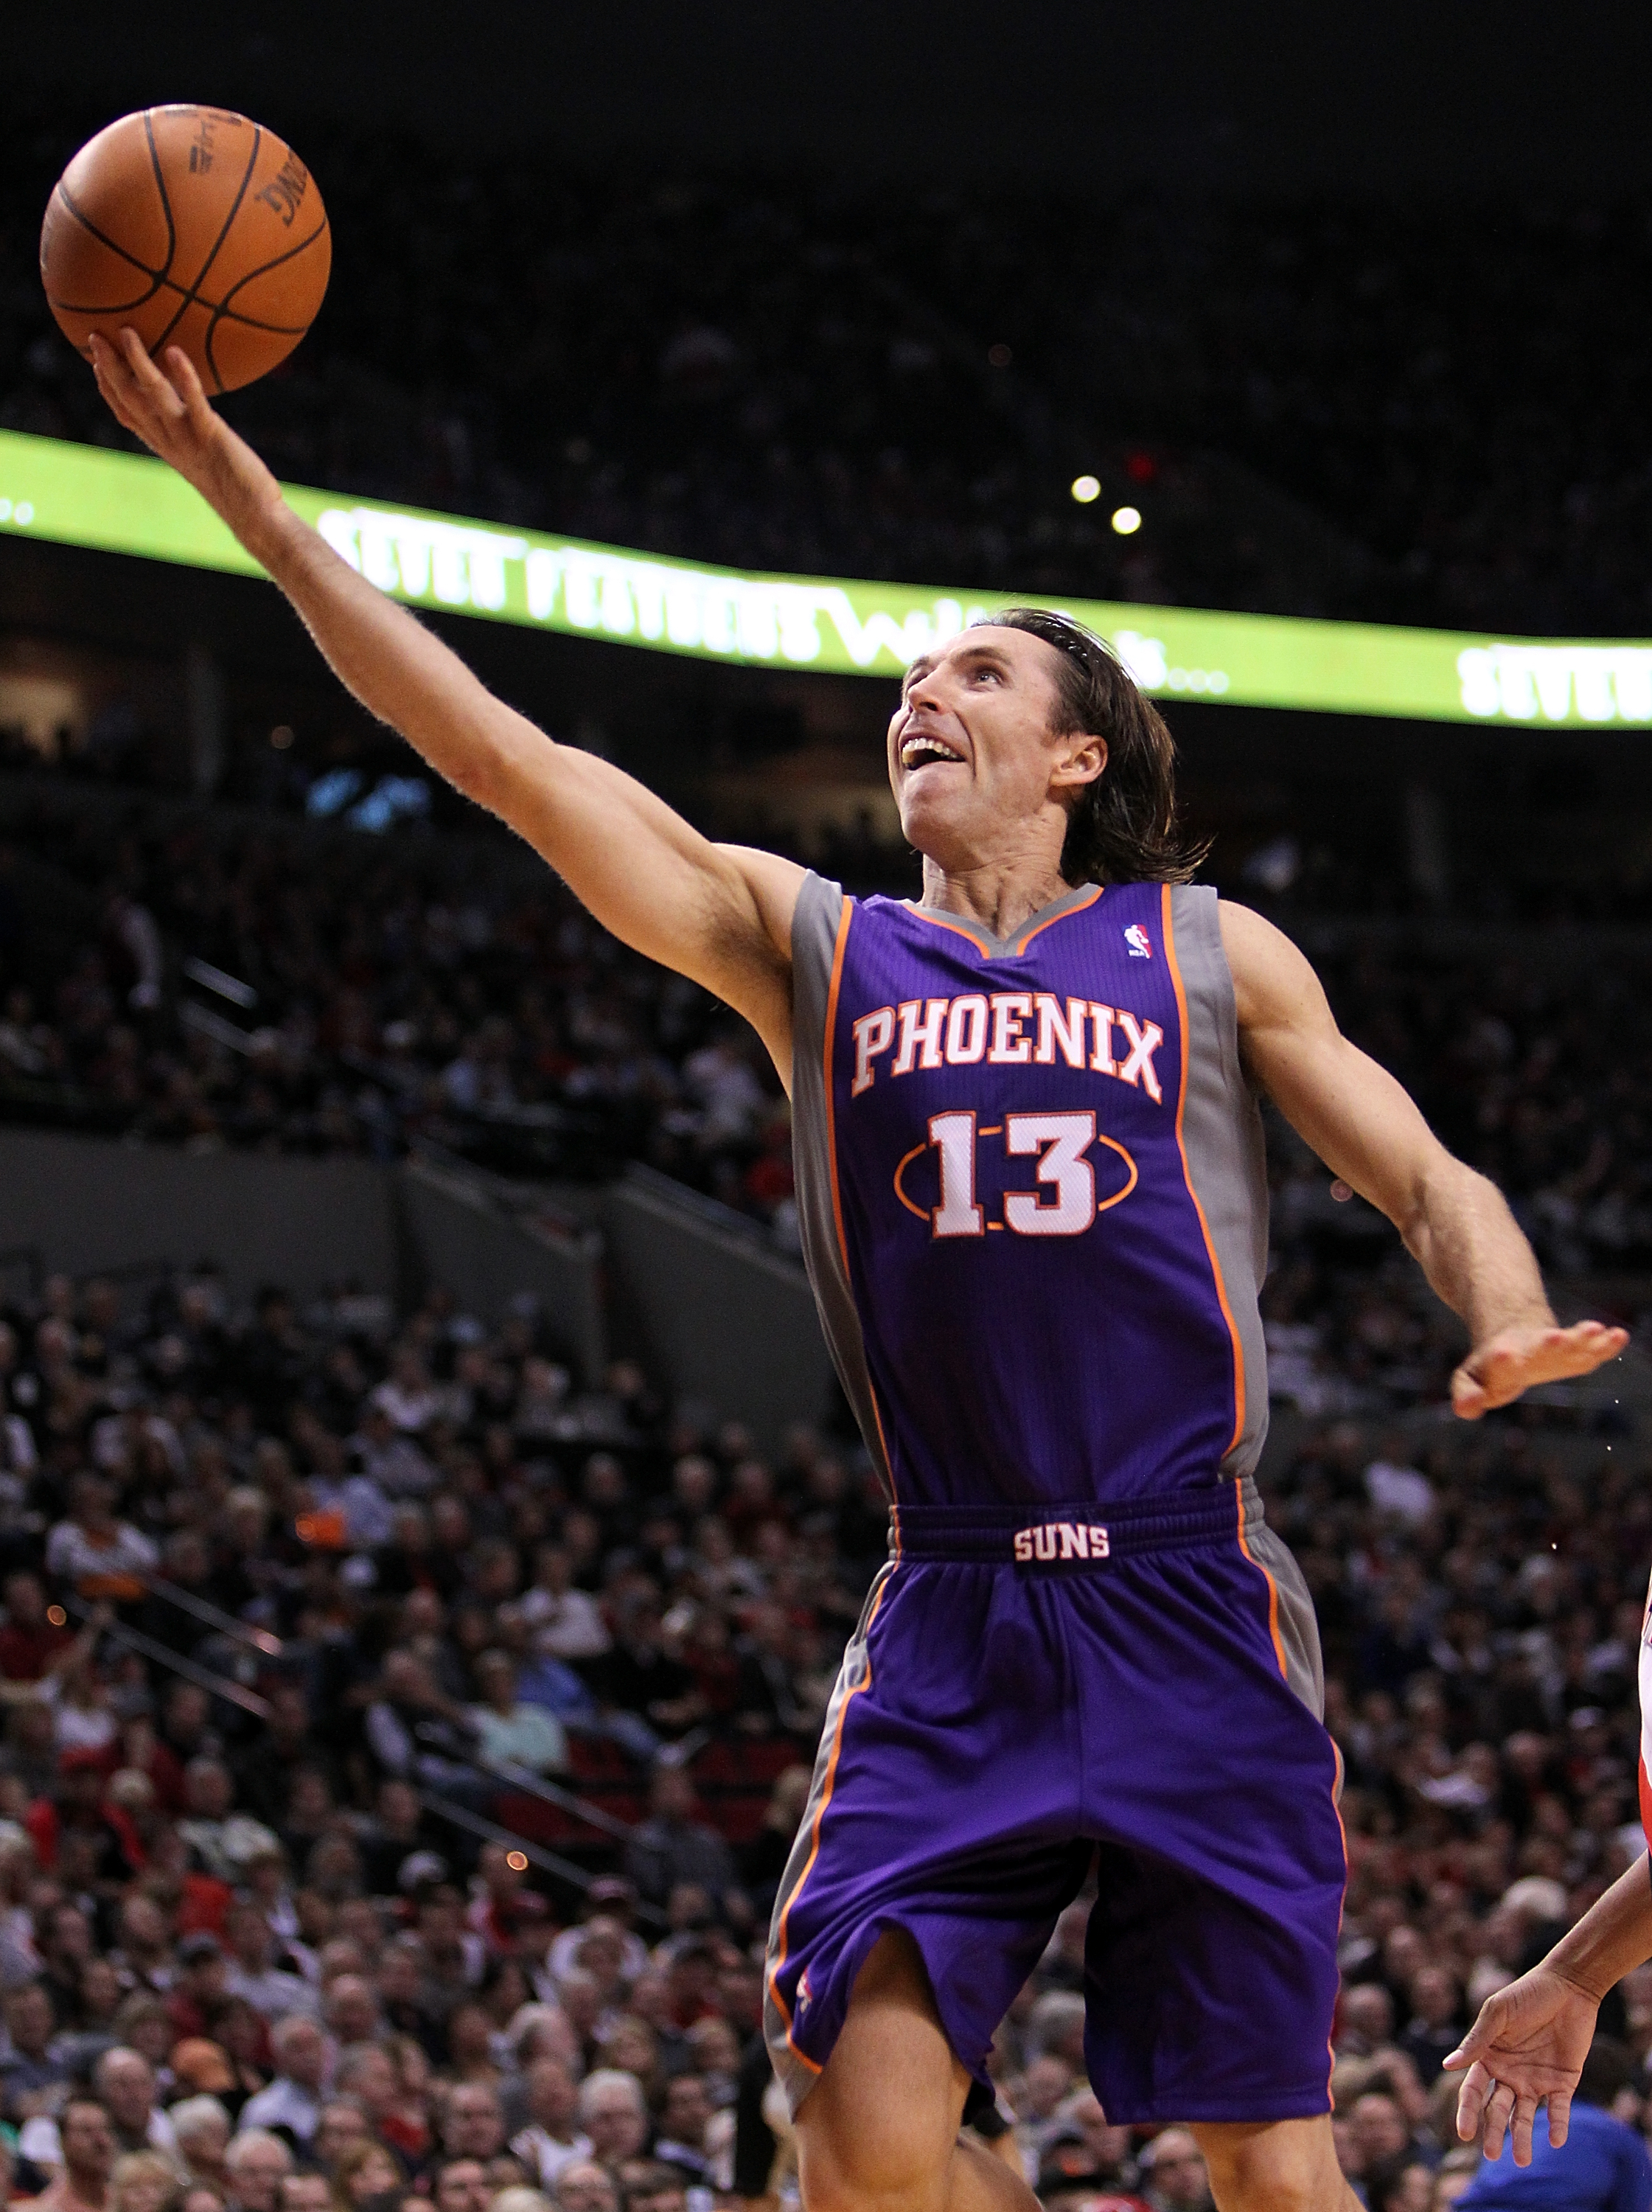 PORTLAND, OR - OCTOBER 26: Steve Nash #13 of the Phoenix Suns lays up the ball agianst the Portland Trail Blazers on October 26, 2010 at the Rose Garden in Portland, Oregon.  NOTE TO USER: User expressly acknowledges and agrees that, by downloading and or